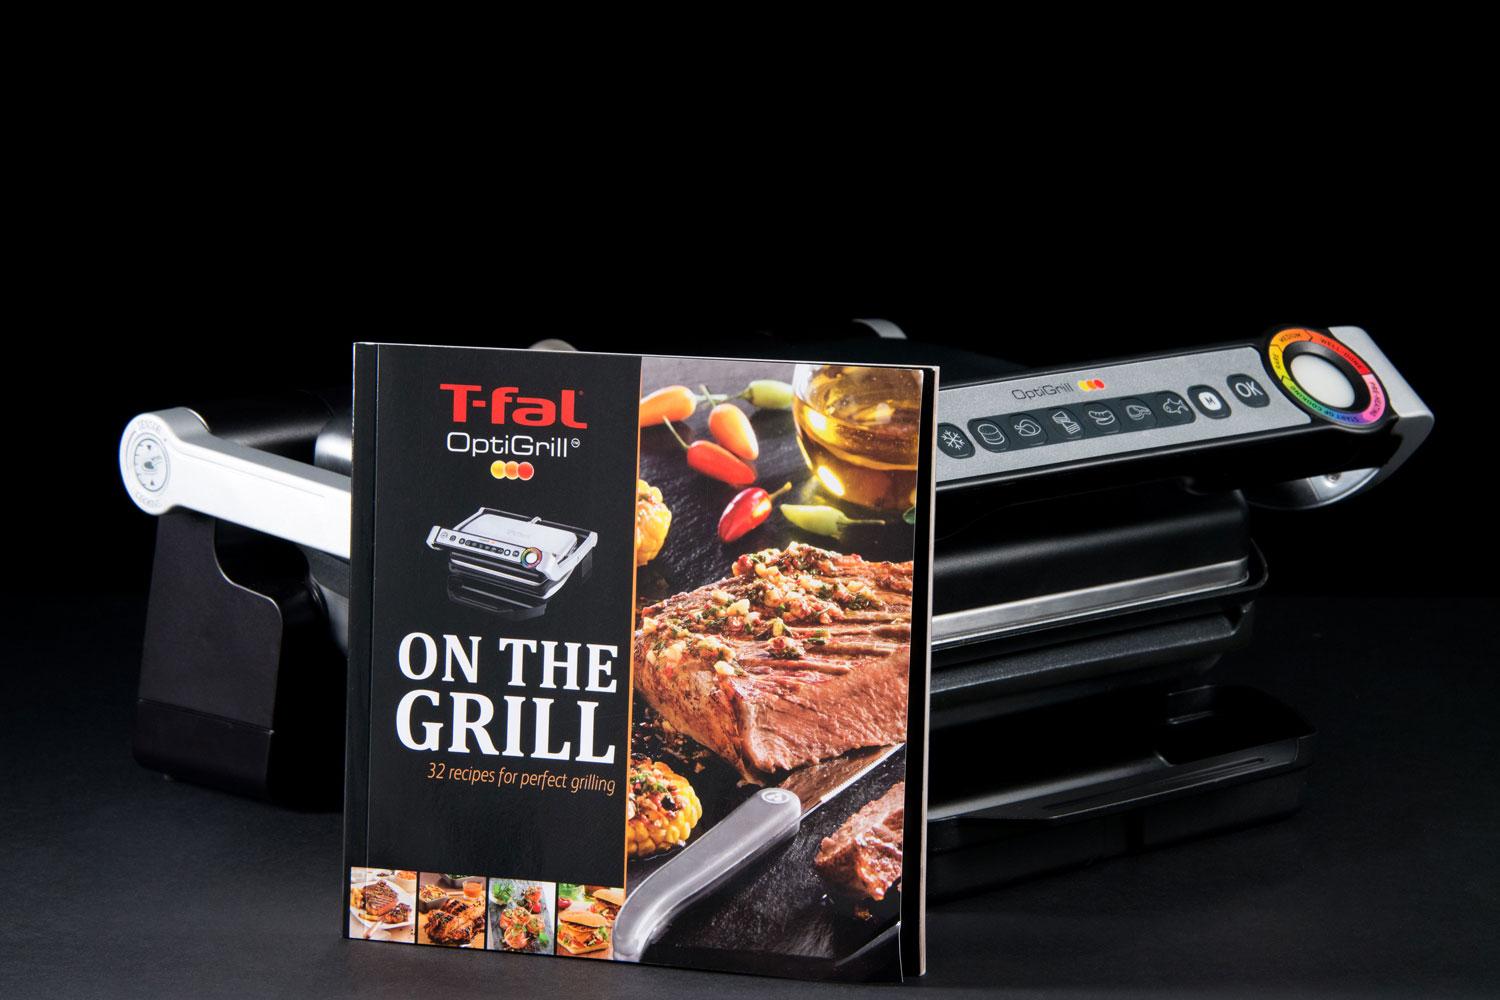 T-fal's OptiGrill: for Grilling Meat to Perfection